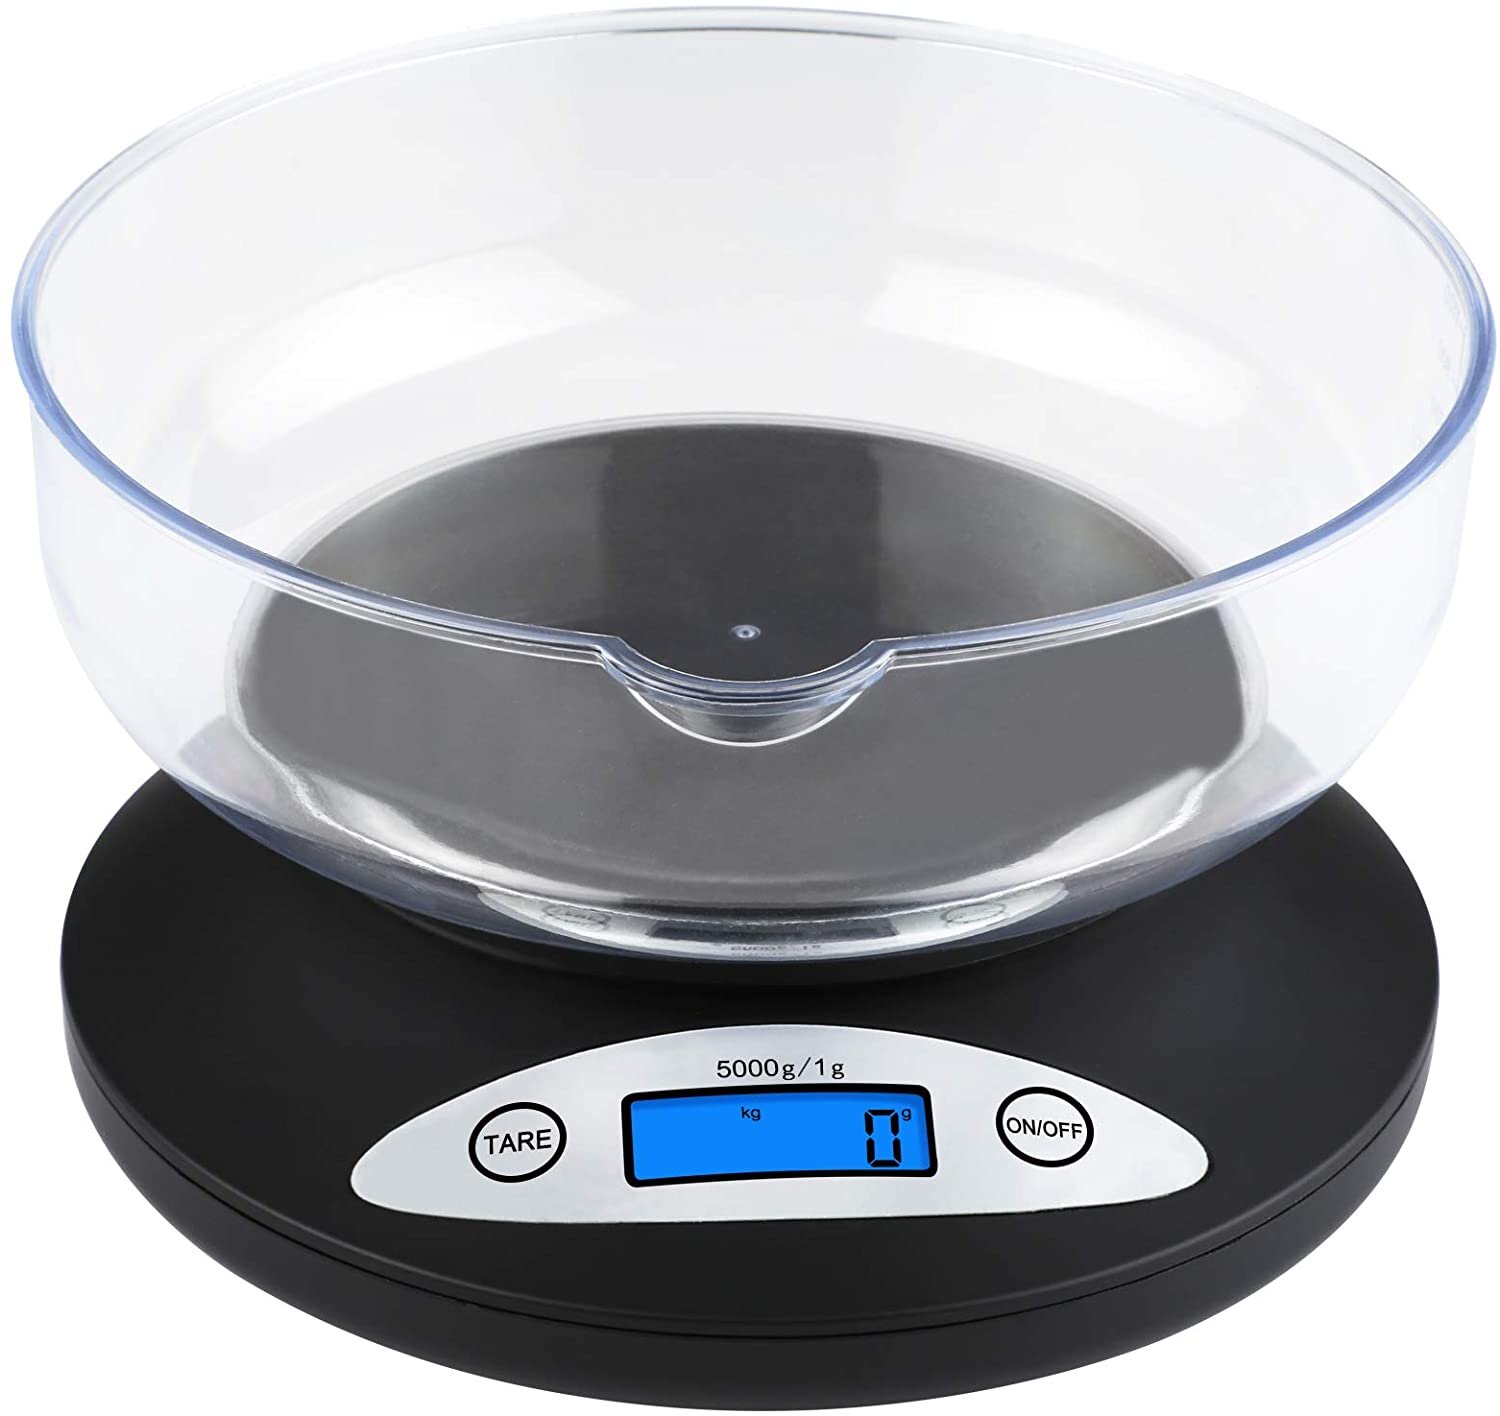 Ounces 11 LBS x 1g Digital Kitchen Food Cooking Scale Weigh in Pounds Grams